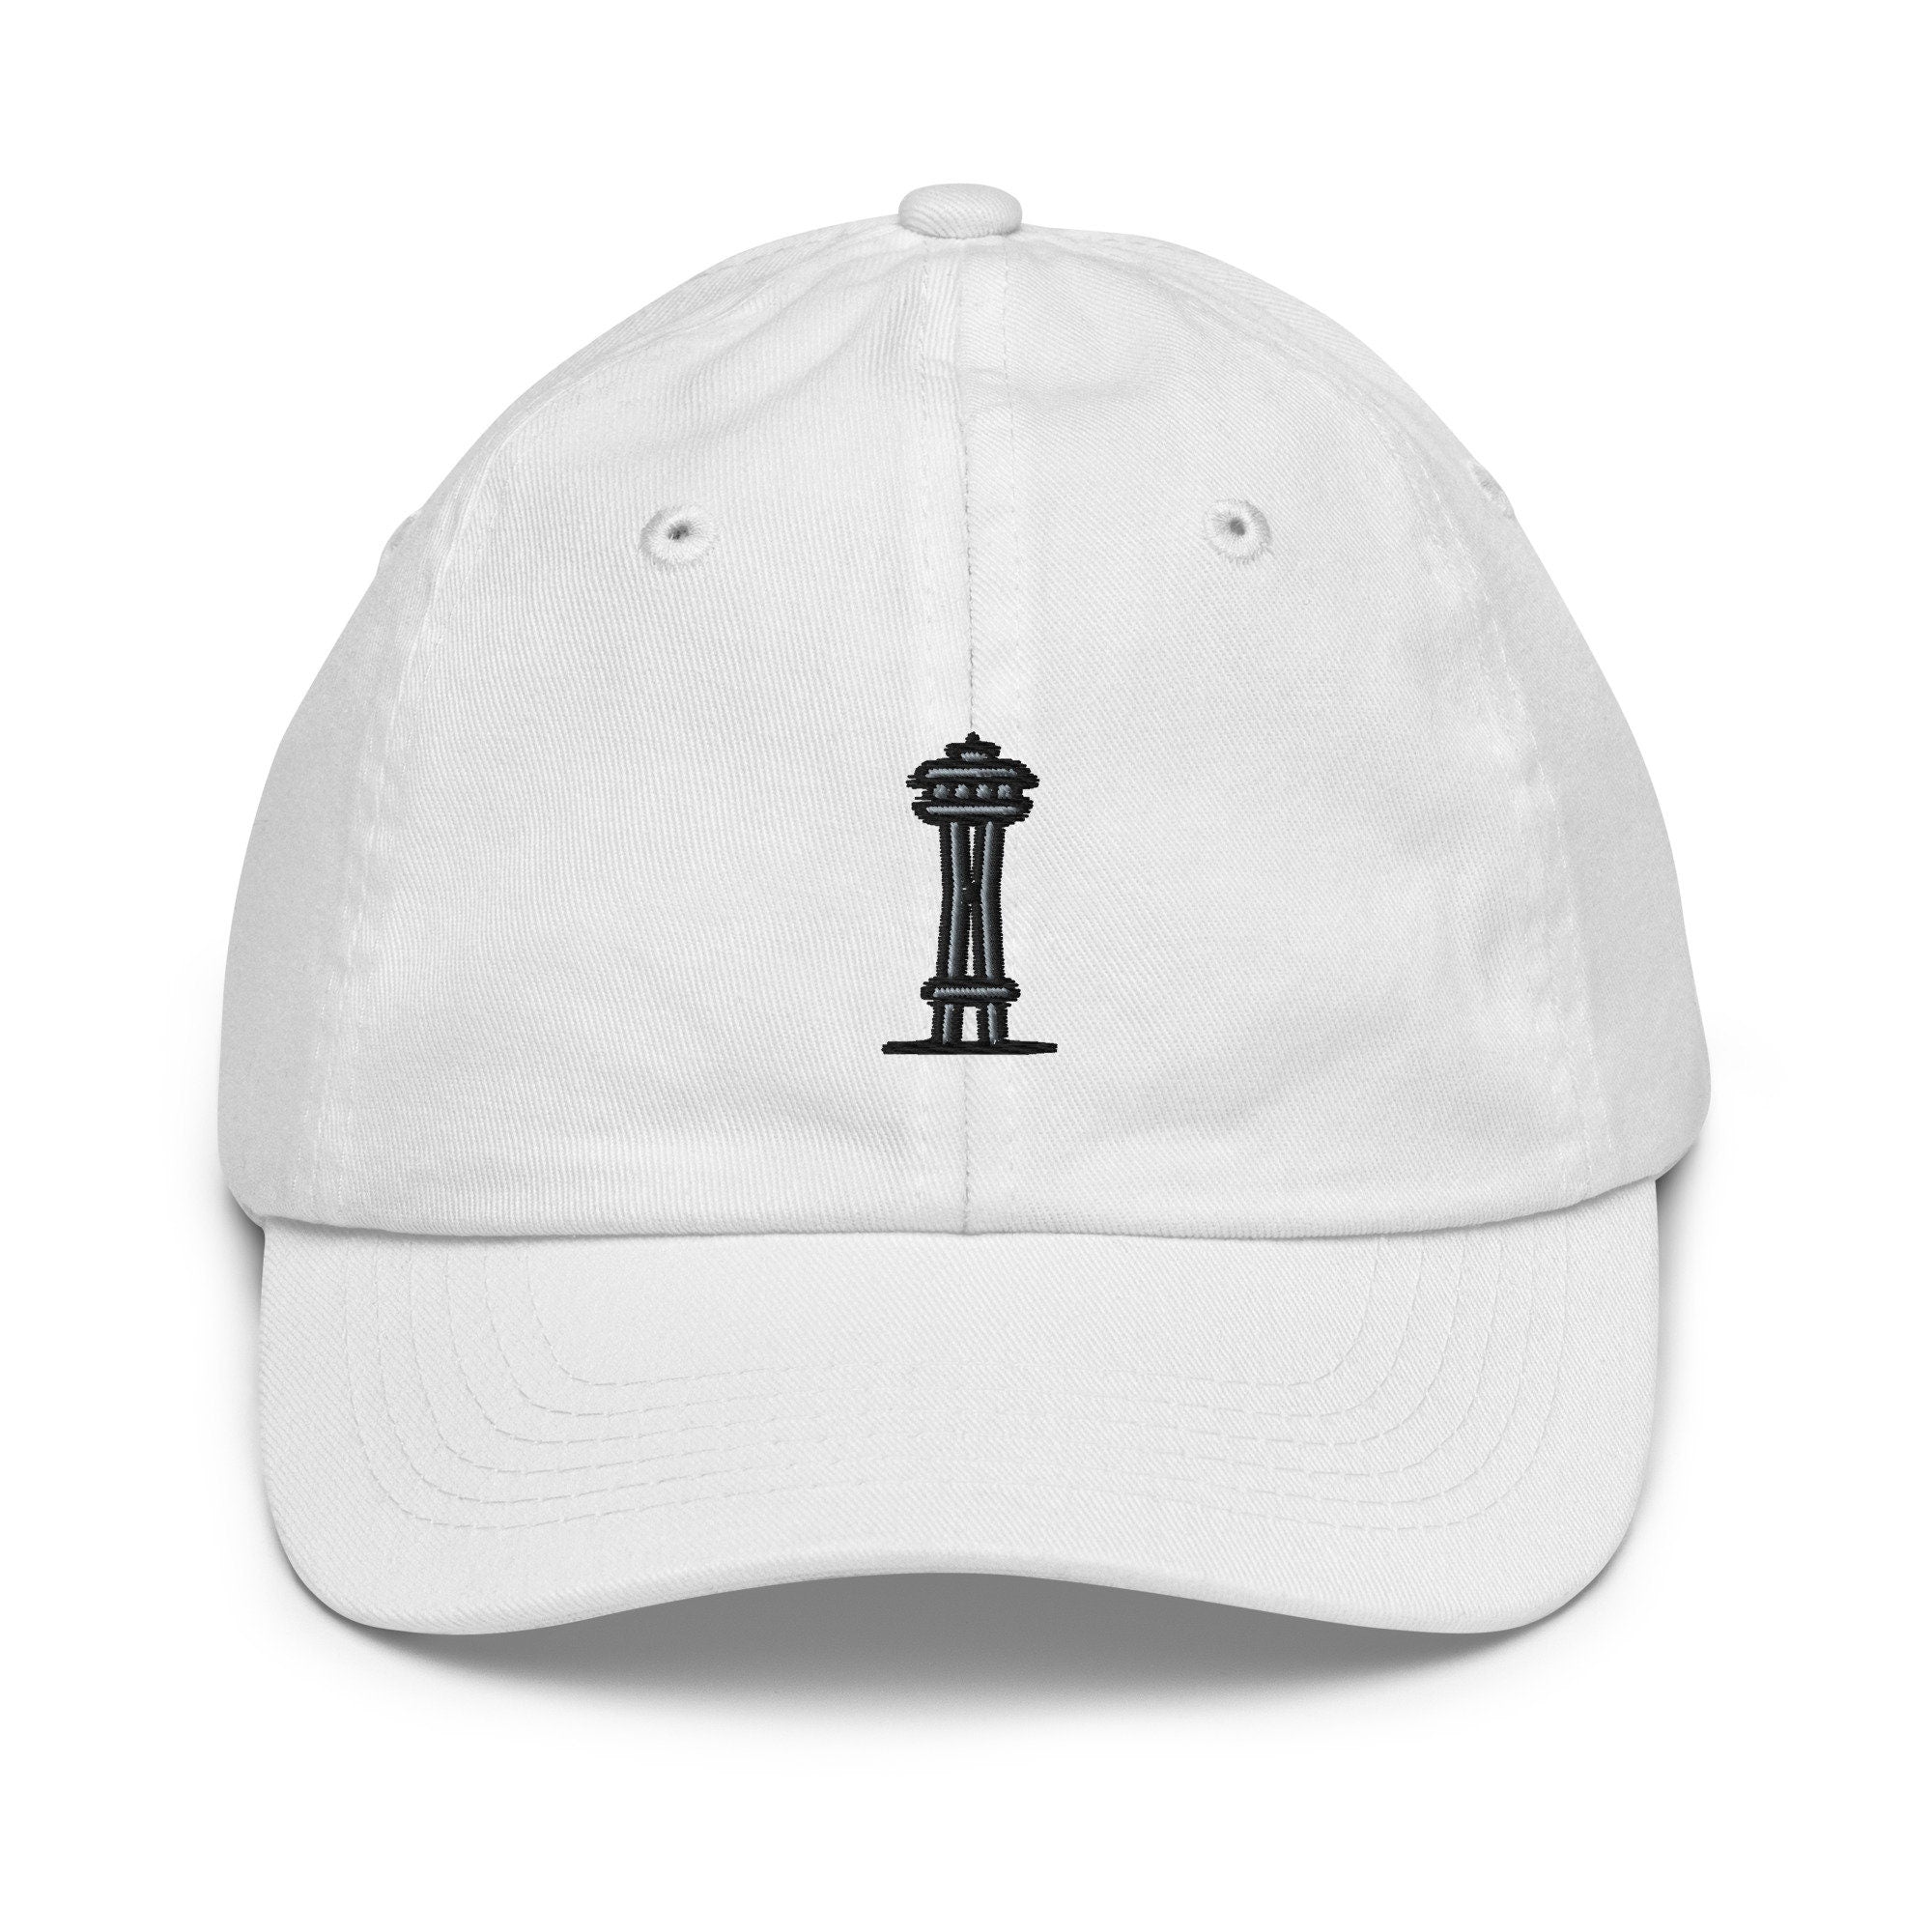 Space Needle Youth Baseball Cap, Handmade Kids Hat, Embroidered Childrens Hat Gift - Multiple Colors